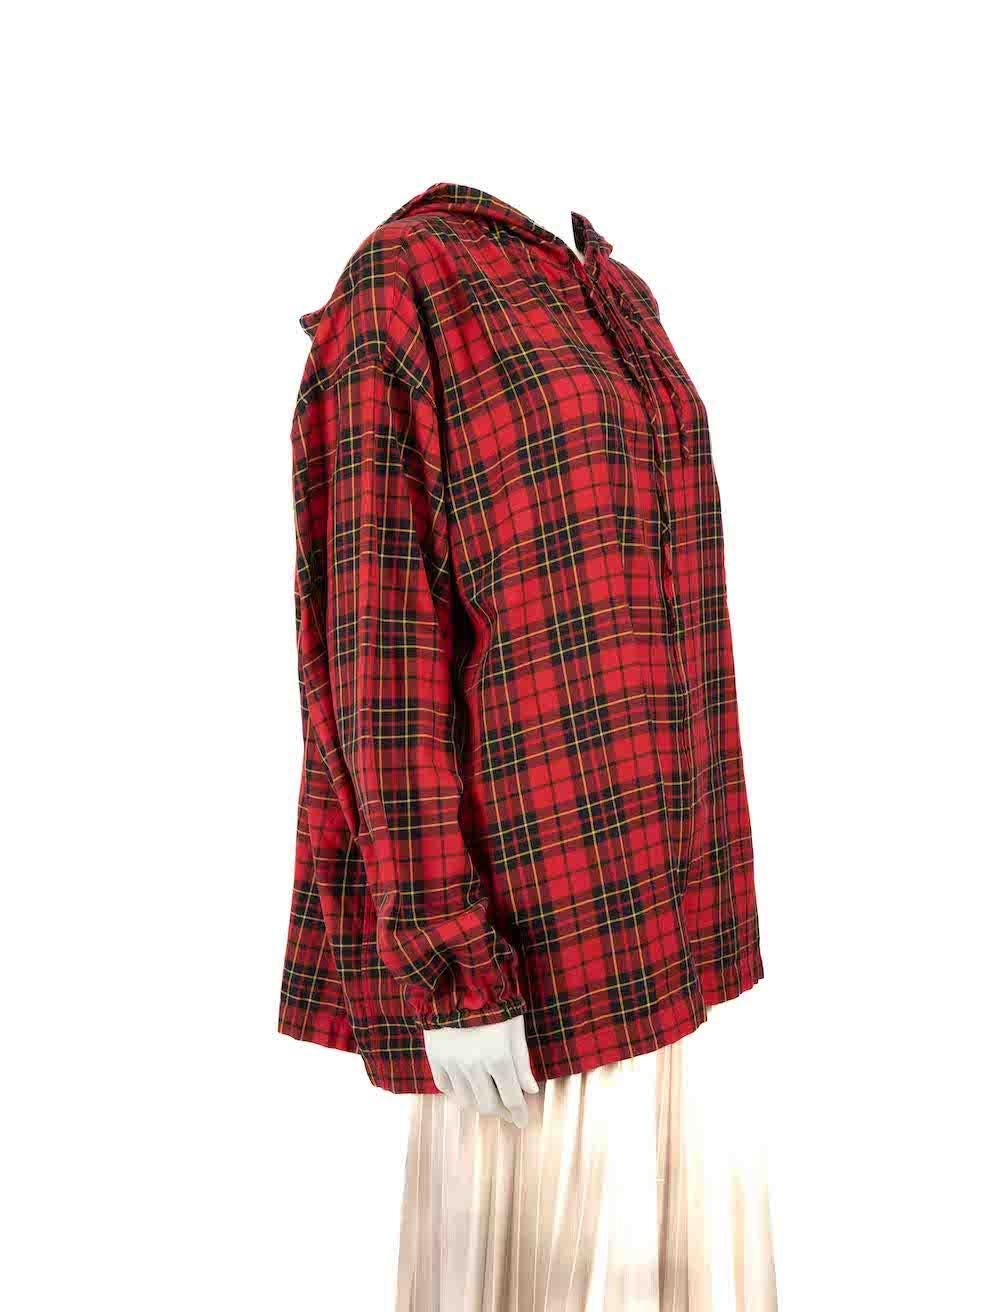 CONDITION is Very good. Hardly any visible wear to jacket is evident on this used Balenciaga designer resale item.
 
 
 
 Details
 
 
 Red
 
 Cotton
 
 Jacket
 
 Tartan print
 
 Zip fastening
 
 Hooded
 
 1x Front pocket
 
 
 
 
 
 Made in Italy
 
